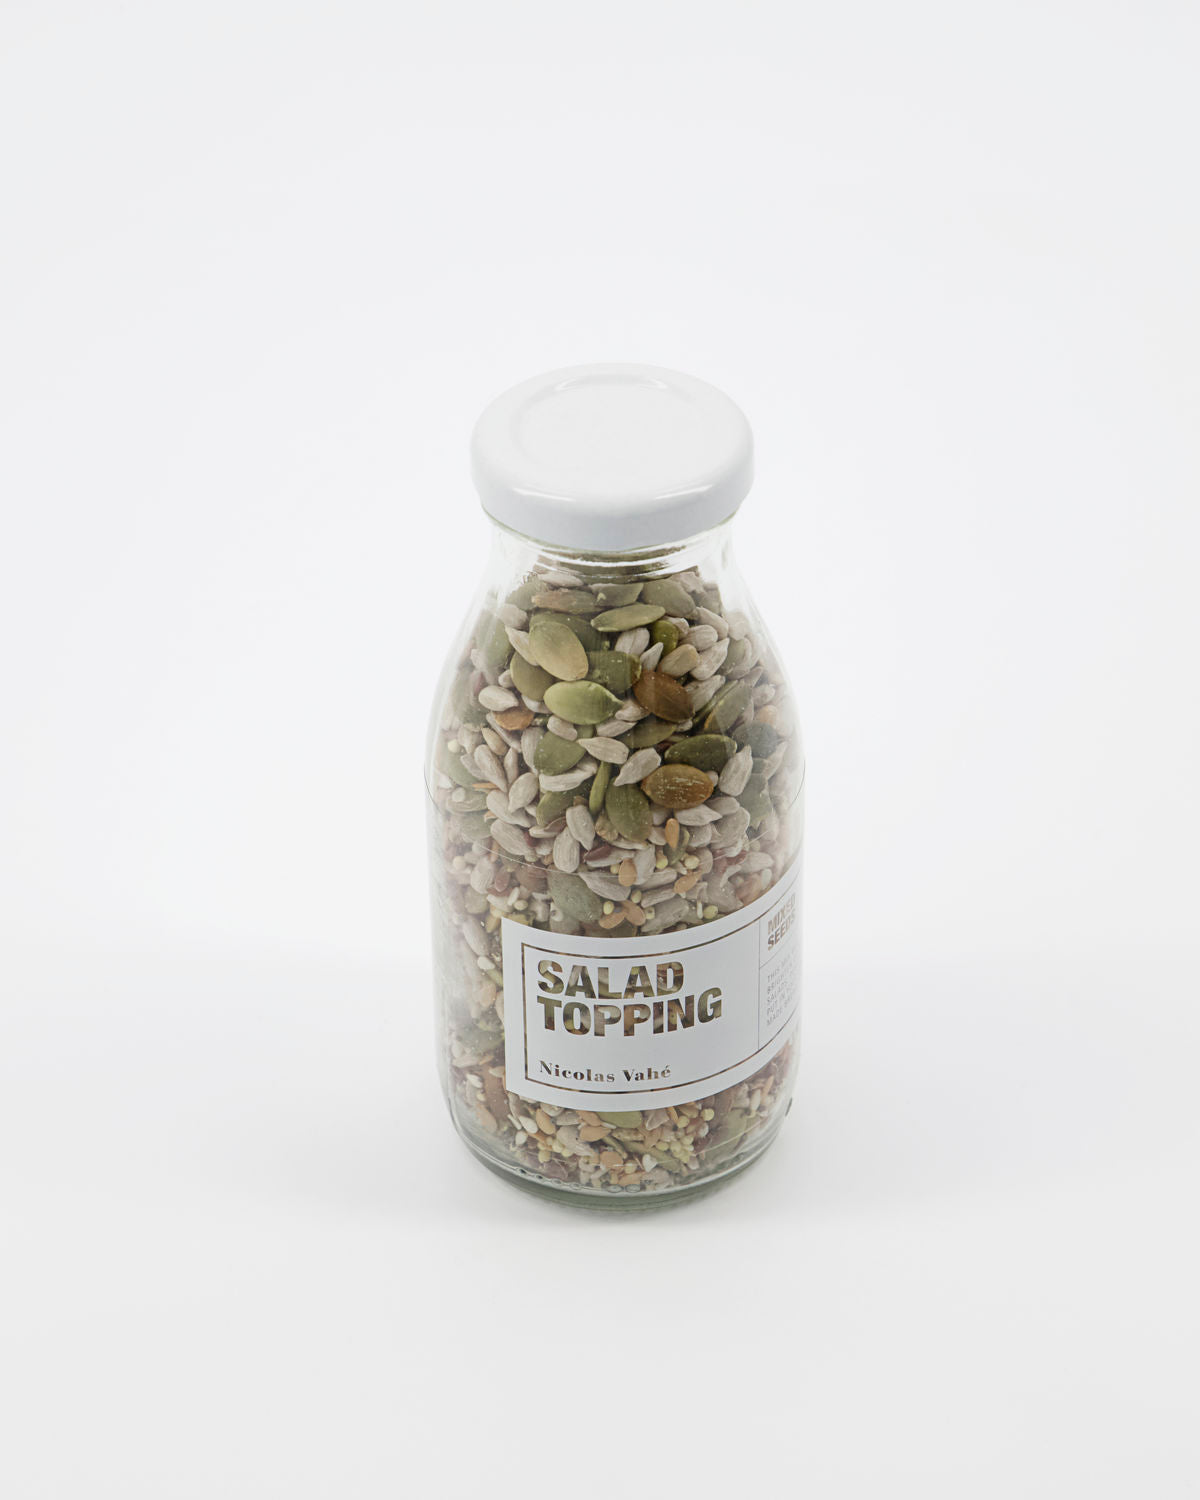 Salad topping - mixed seeds